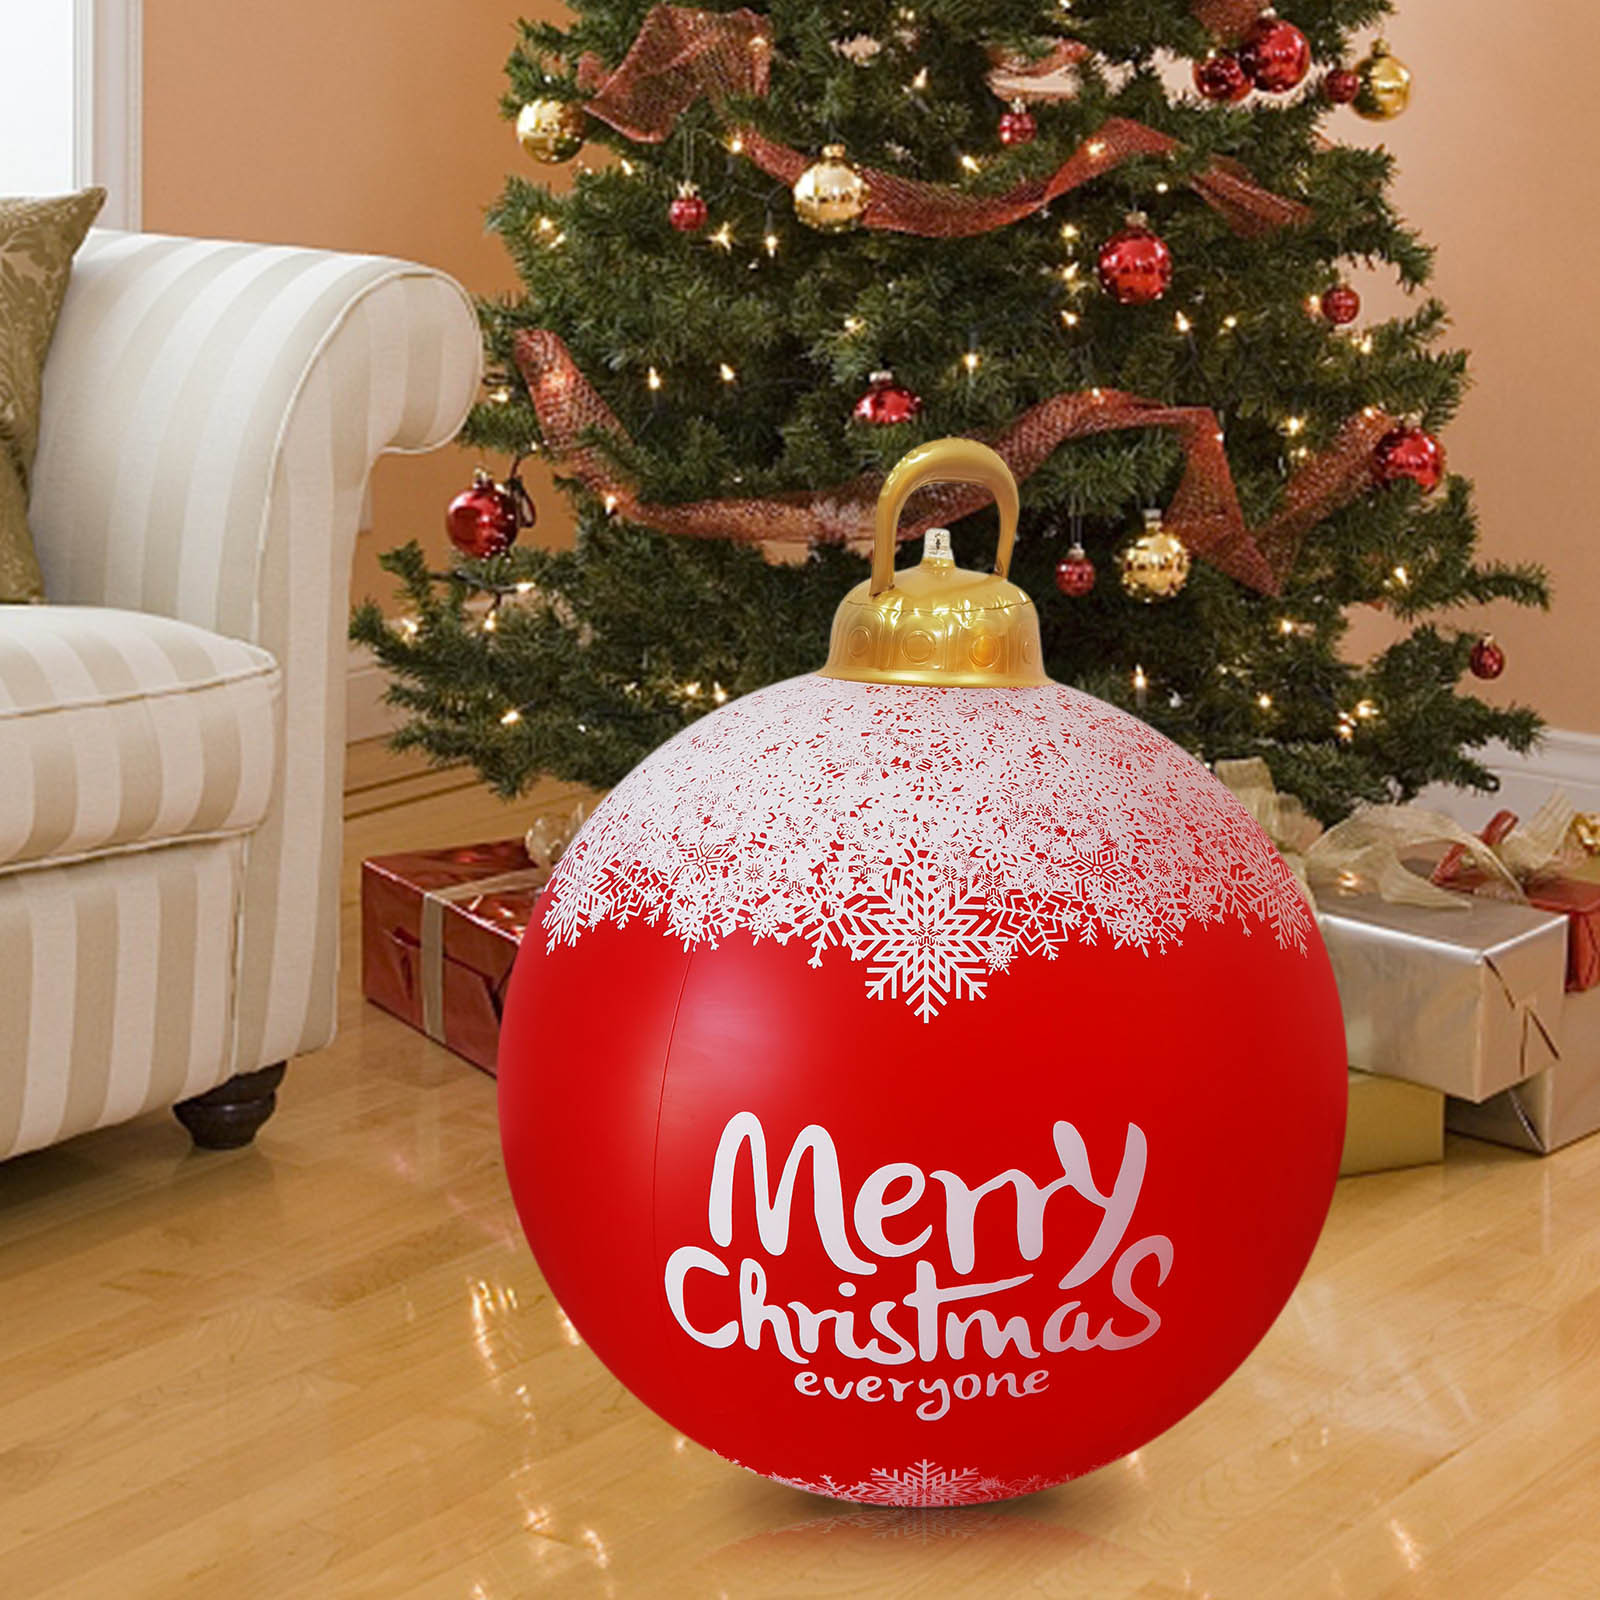 AURIGATE 24 Inch Giant PVC Inflatable Christmas Decorated Ball ...